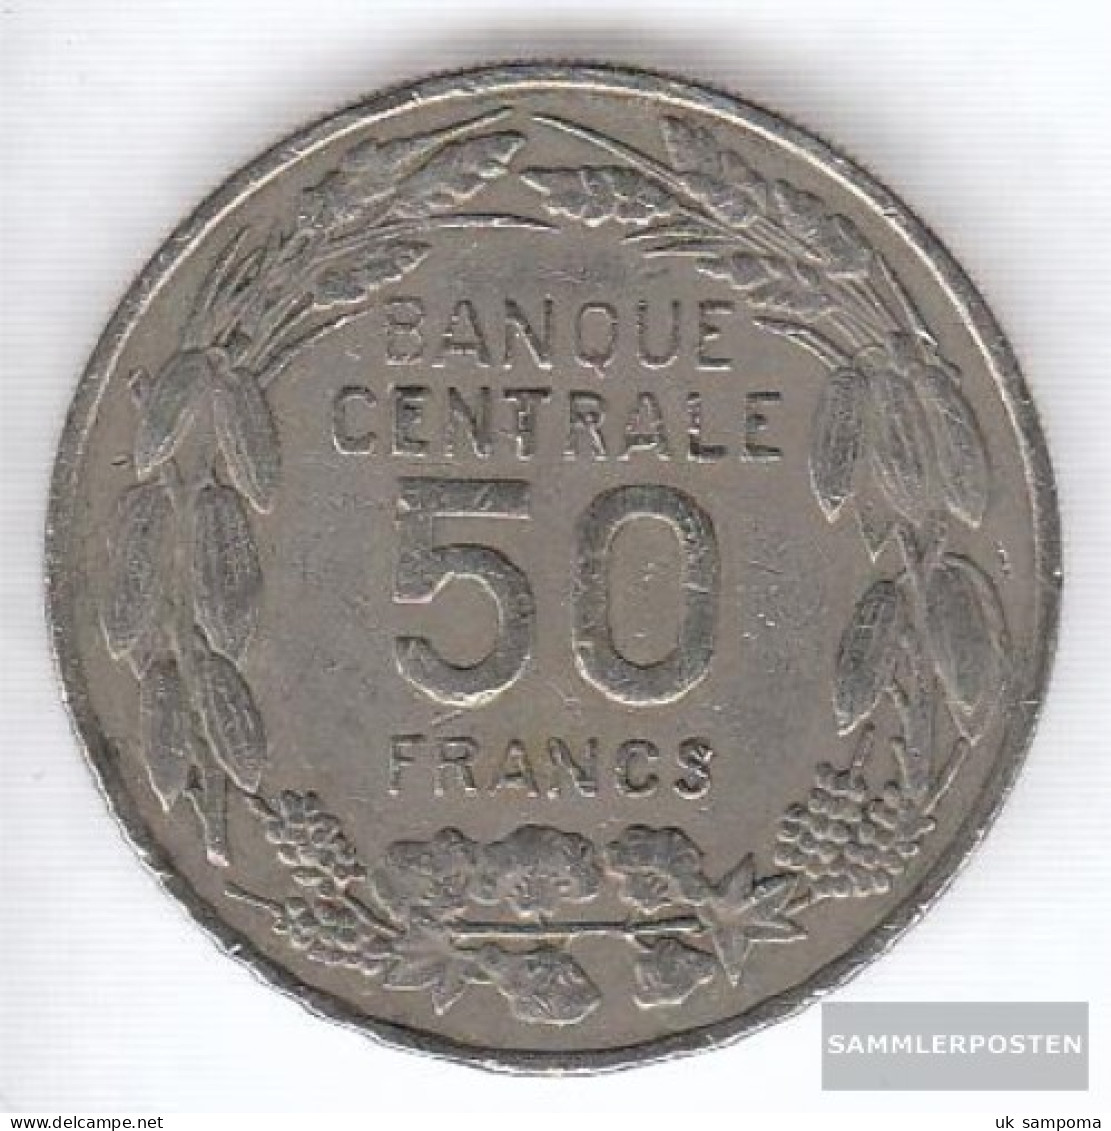 Cameroon Km-number. : 13 1960 Very Fine Copper-Nickel Very Fine 1960 50 Francs Antelope - Cameroon